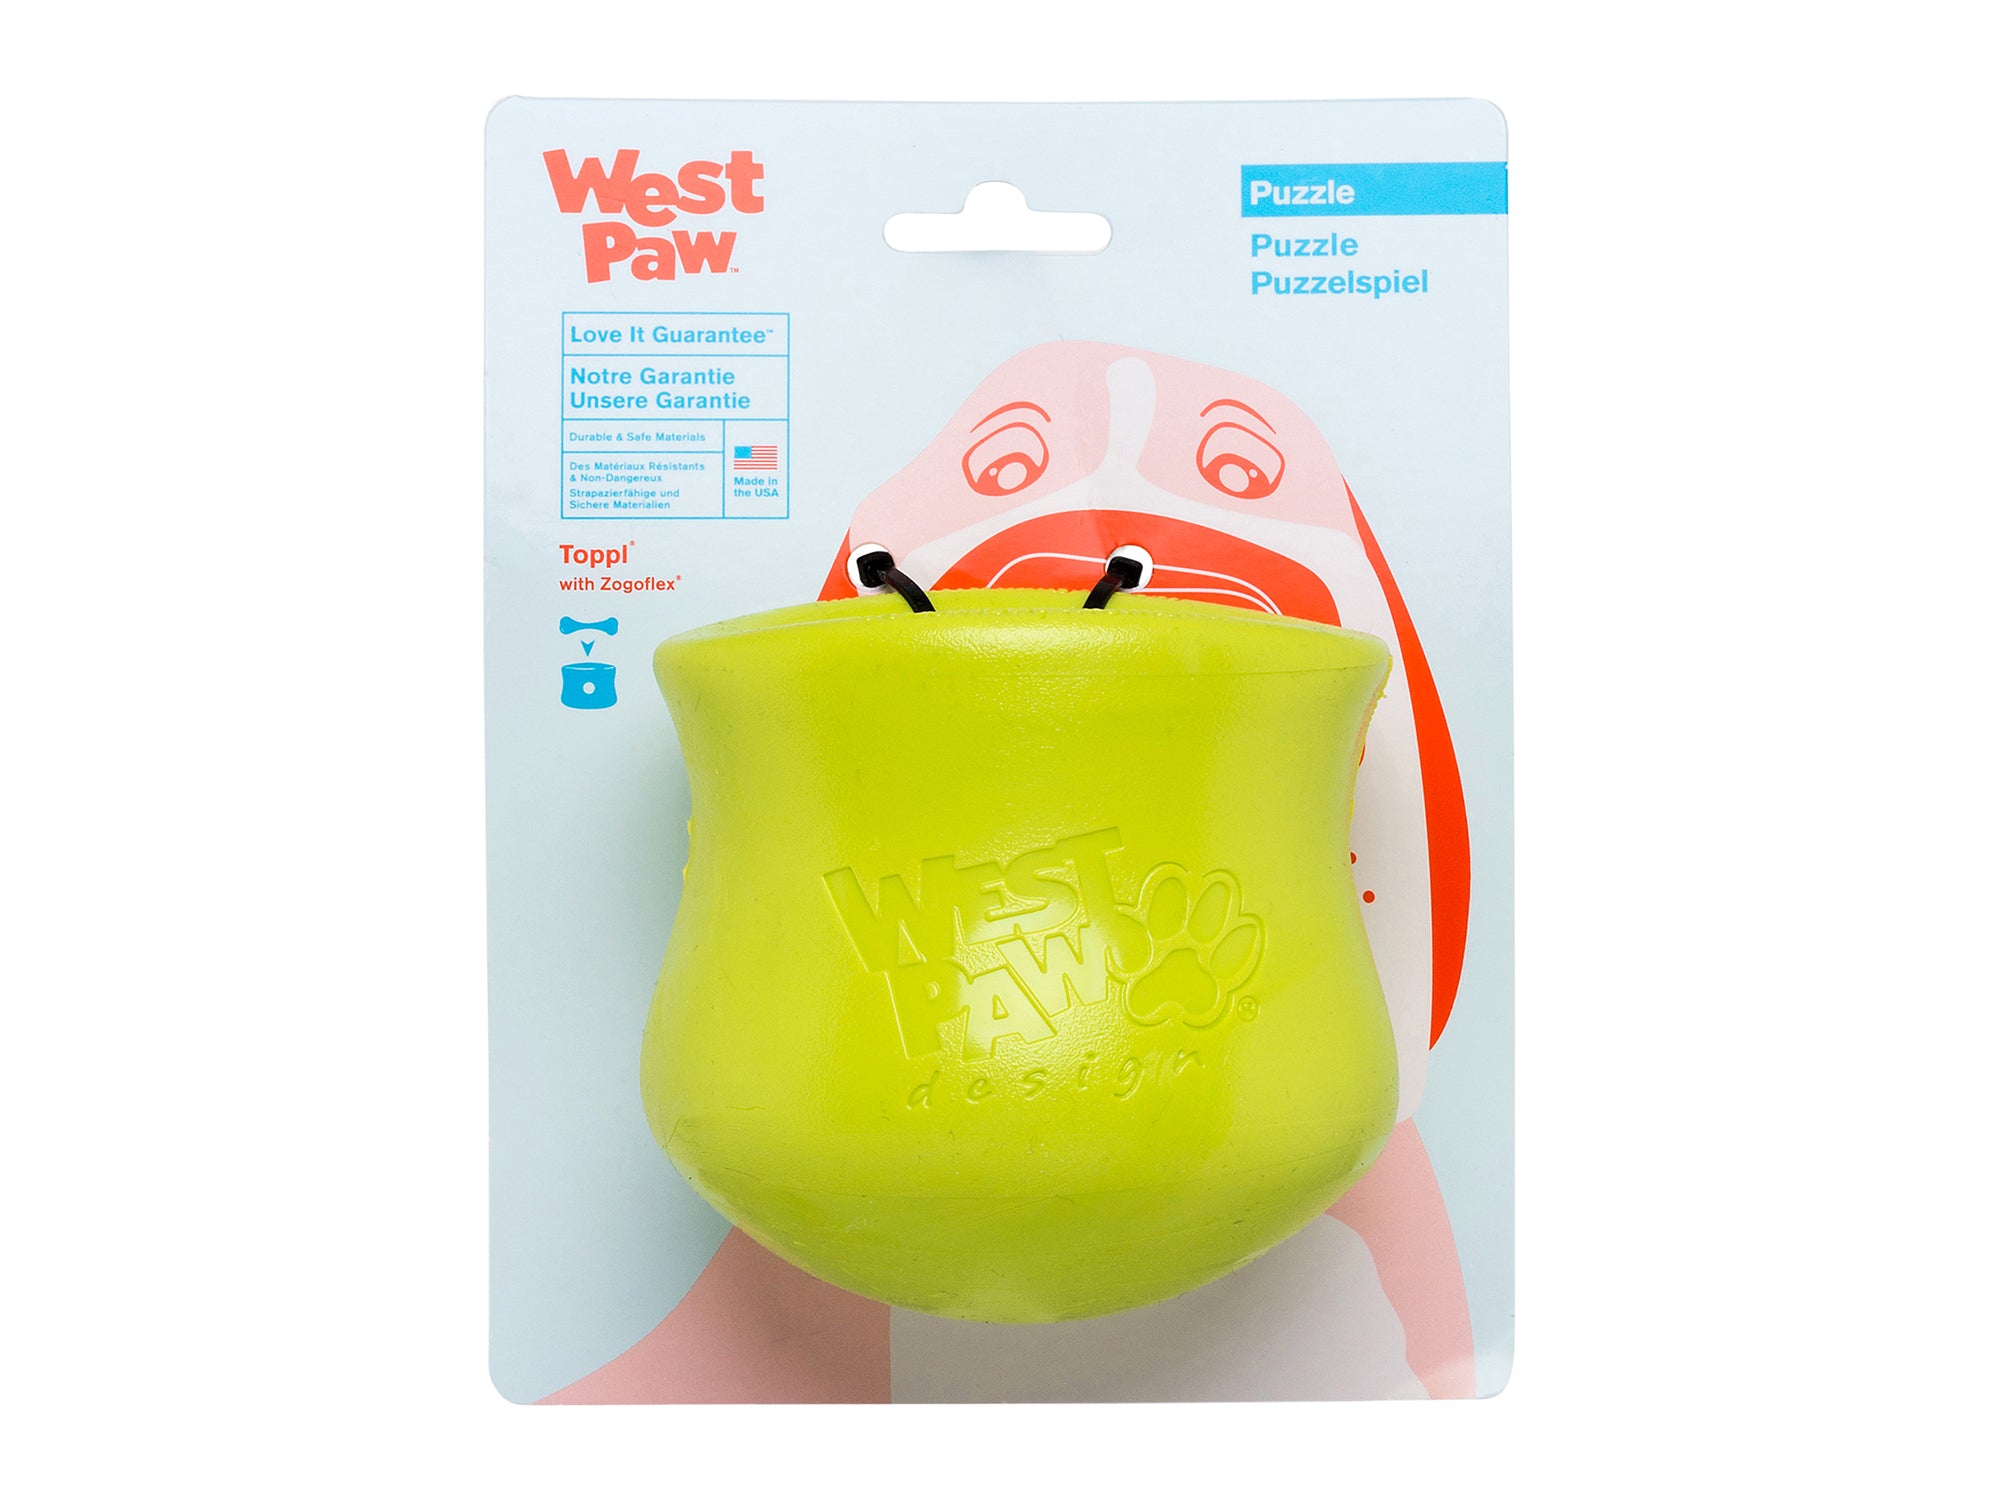 Toppl is an award-winning puzzle toy that can be stuffed full of your dog's favorite snacks. This interactive treat toy is topsy, turvy, and wobbly fun that keeps an active dog busy and brings out the playful side of an older dog.